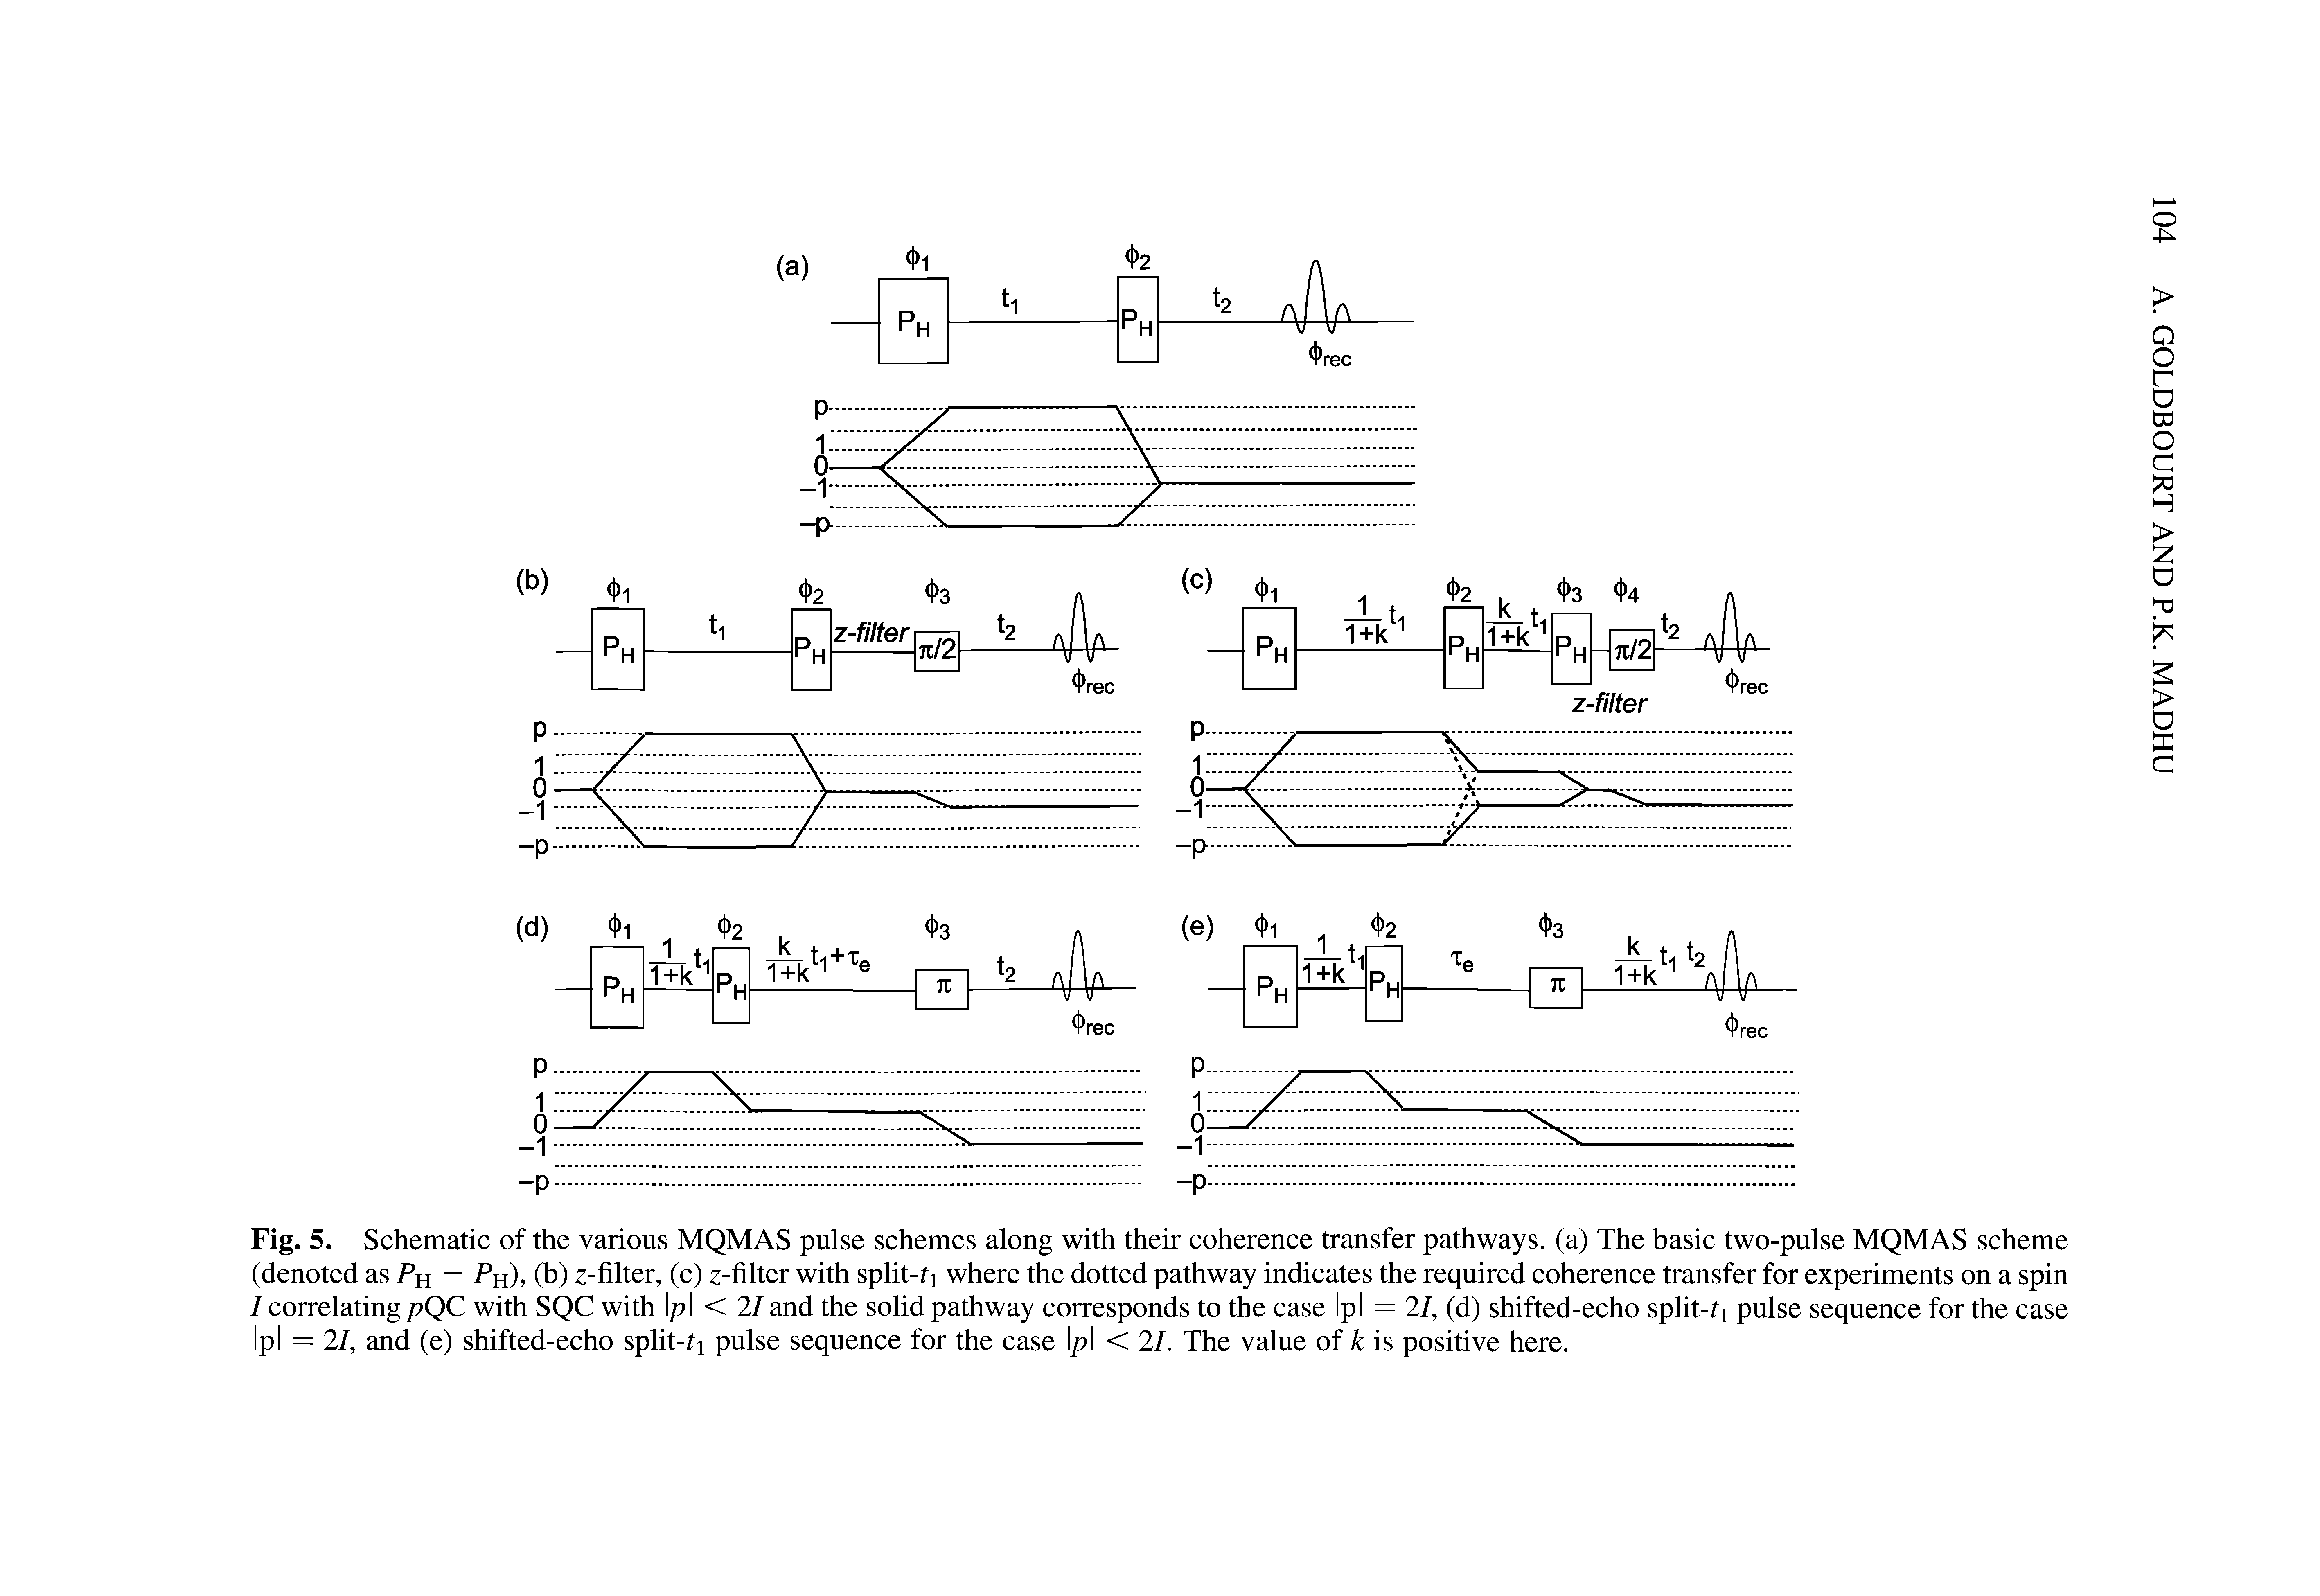 Fig. 5. Schematic of the various MQMAS pulse schemes along with their coherence transfer pathways, (a) The basic two-pulse MQMAS scheme (denoted as Ph h), (b) z-filter, (c) z-filter with split-ri where the dotted pathway indicates the required coherence transfer for experiments on a spin I correlating pQC with SQC with I/ I <2/ and the solid pathway corresponds to the case Ip I = 21, (d) shifted-echo split-ri pulse sequence for the case Ip I = 21, and (c) shifted-echo split-ri pulse sequence for the case p < 21. The value of k is positive here.